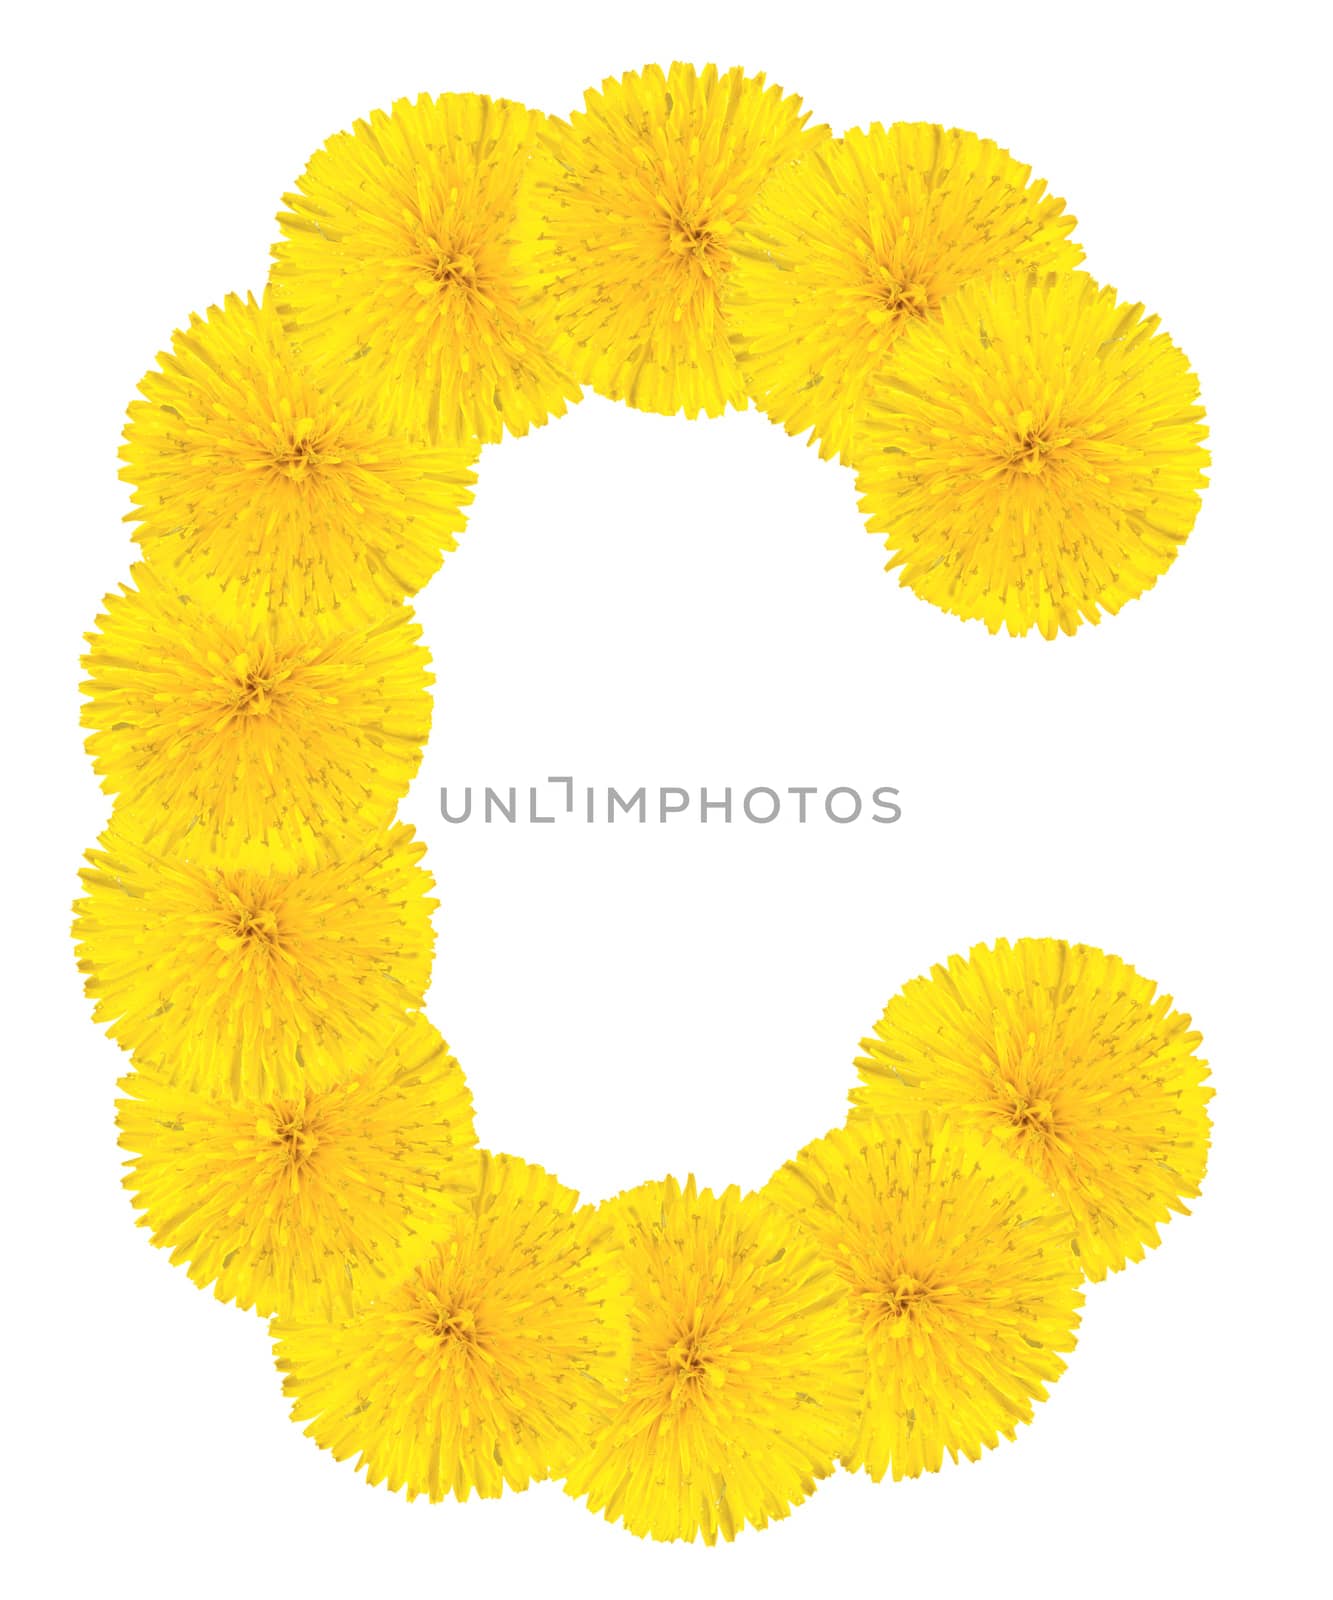 Letter C made from dandelions by Valengilda